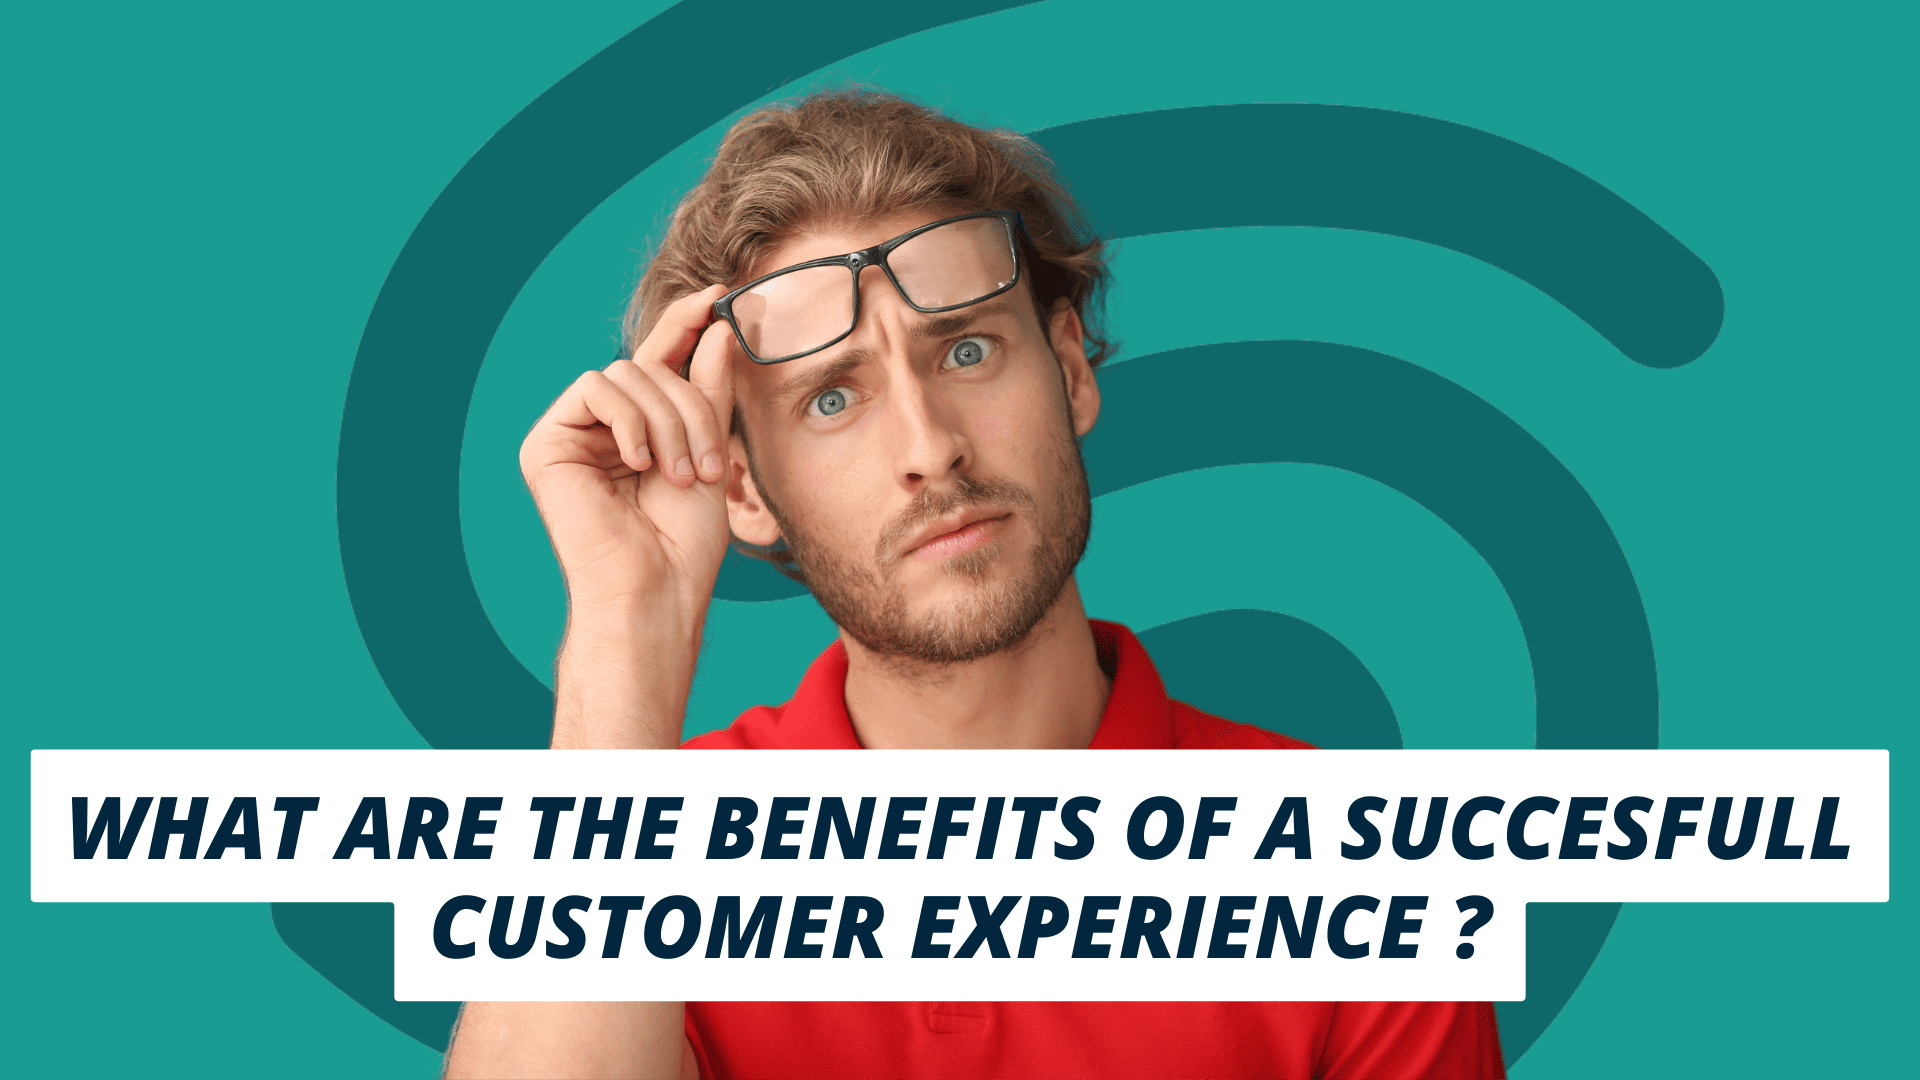 What are the benefits of a successful customer experience?